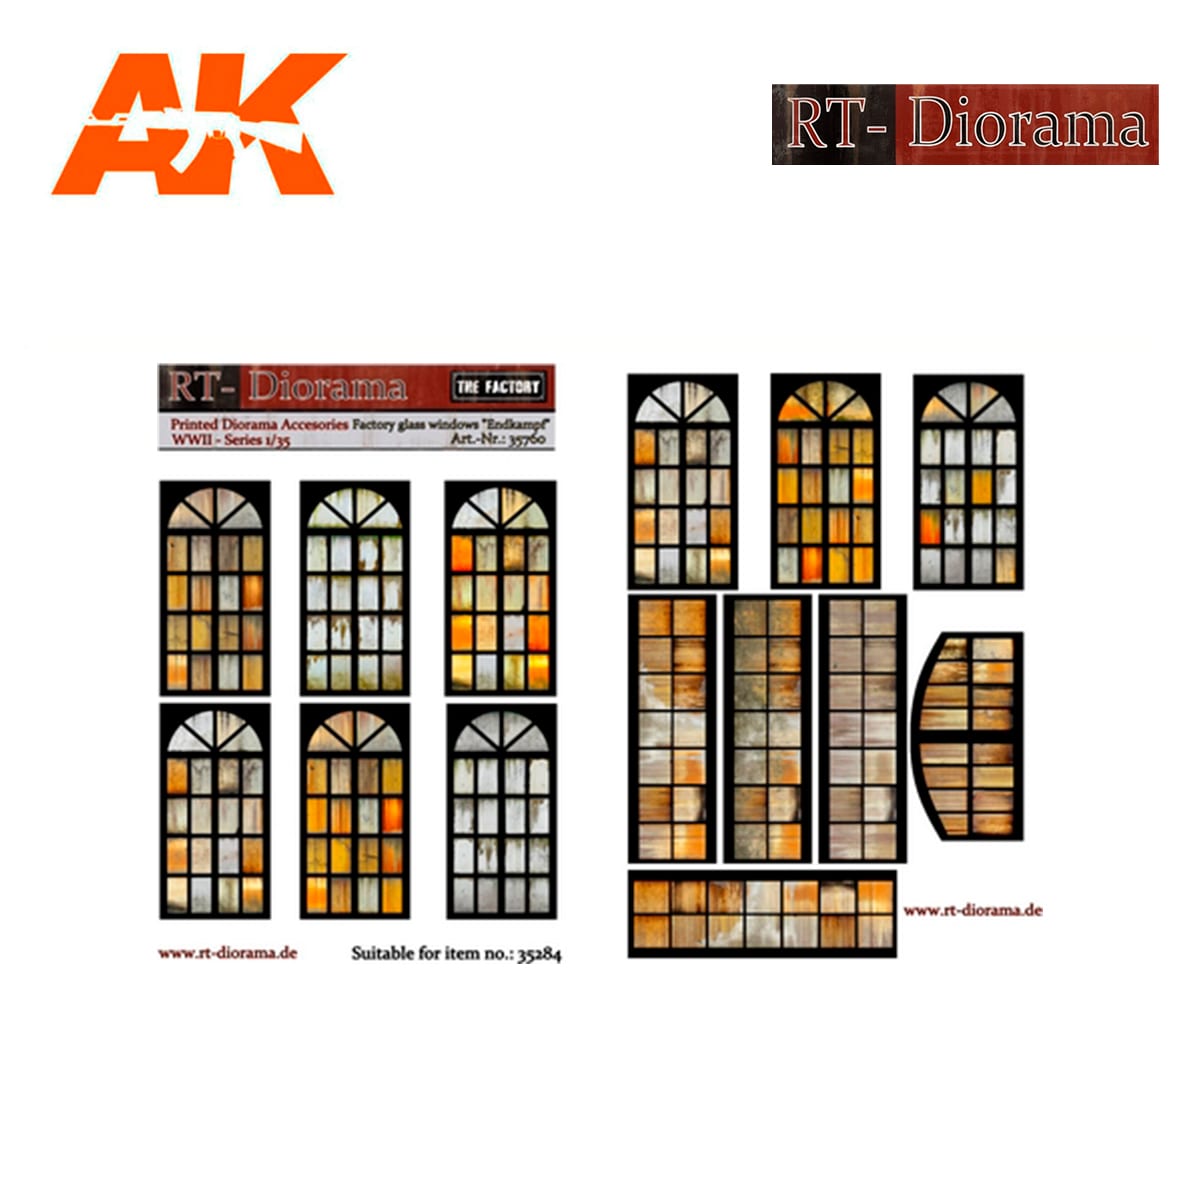 Printed Accesories: Factory glass windows “Endkampf”